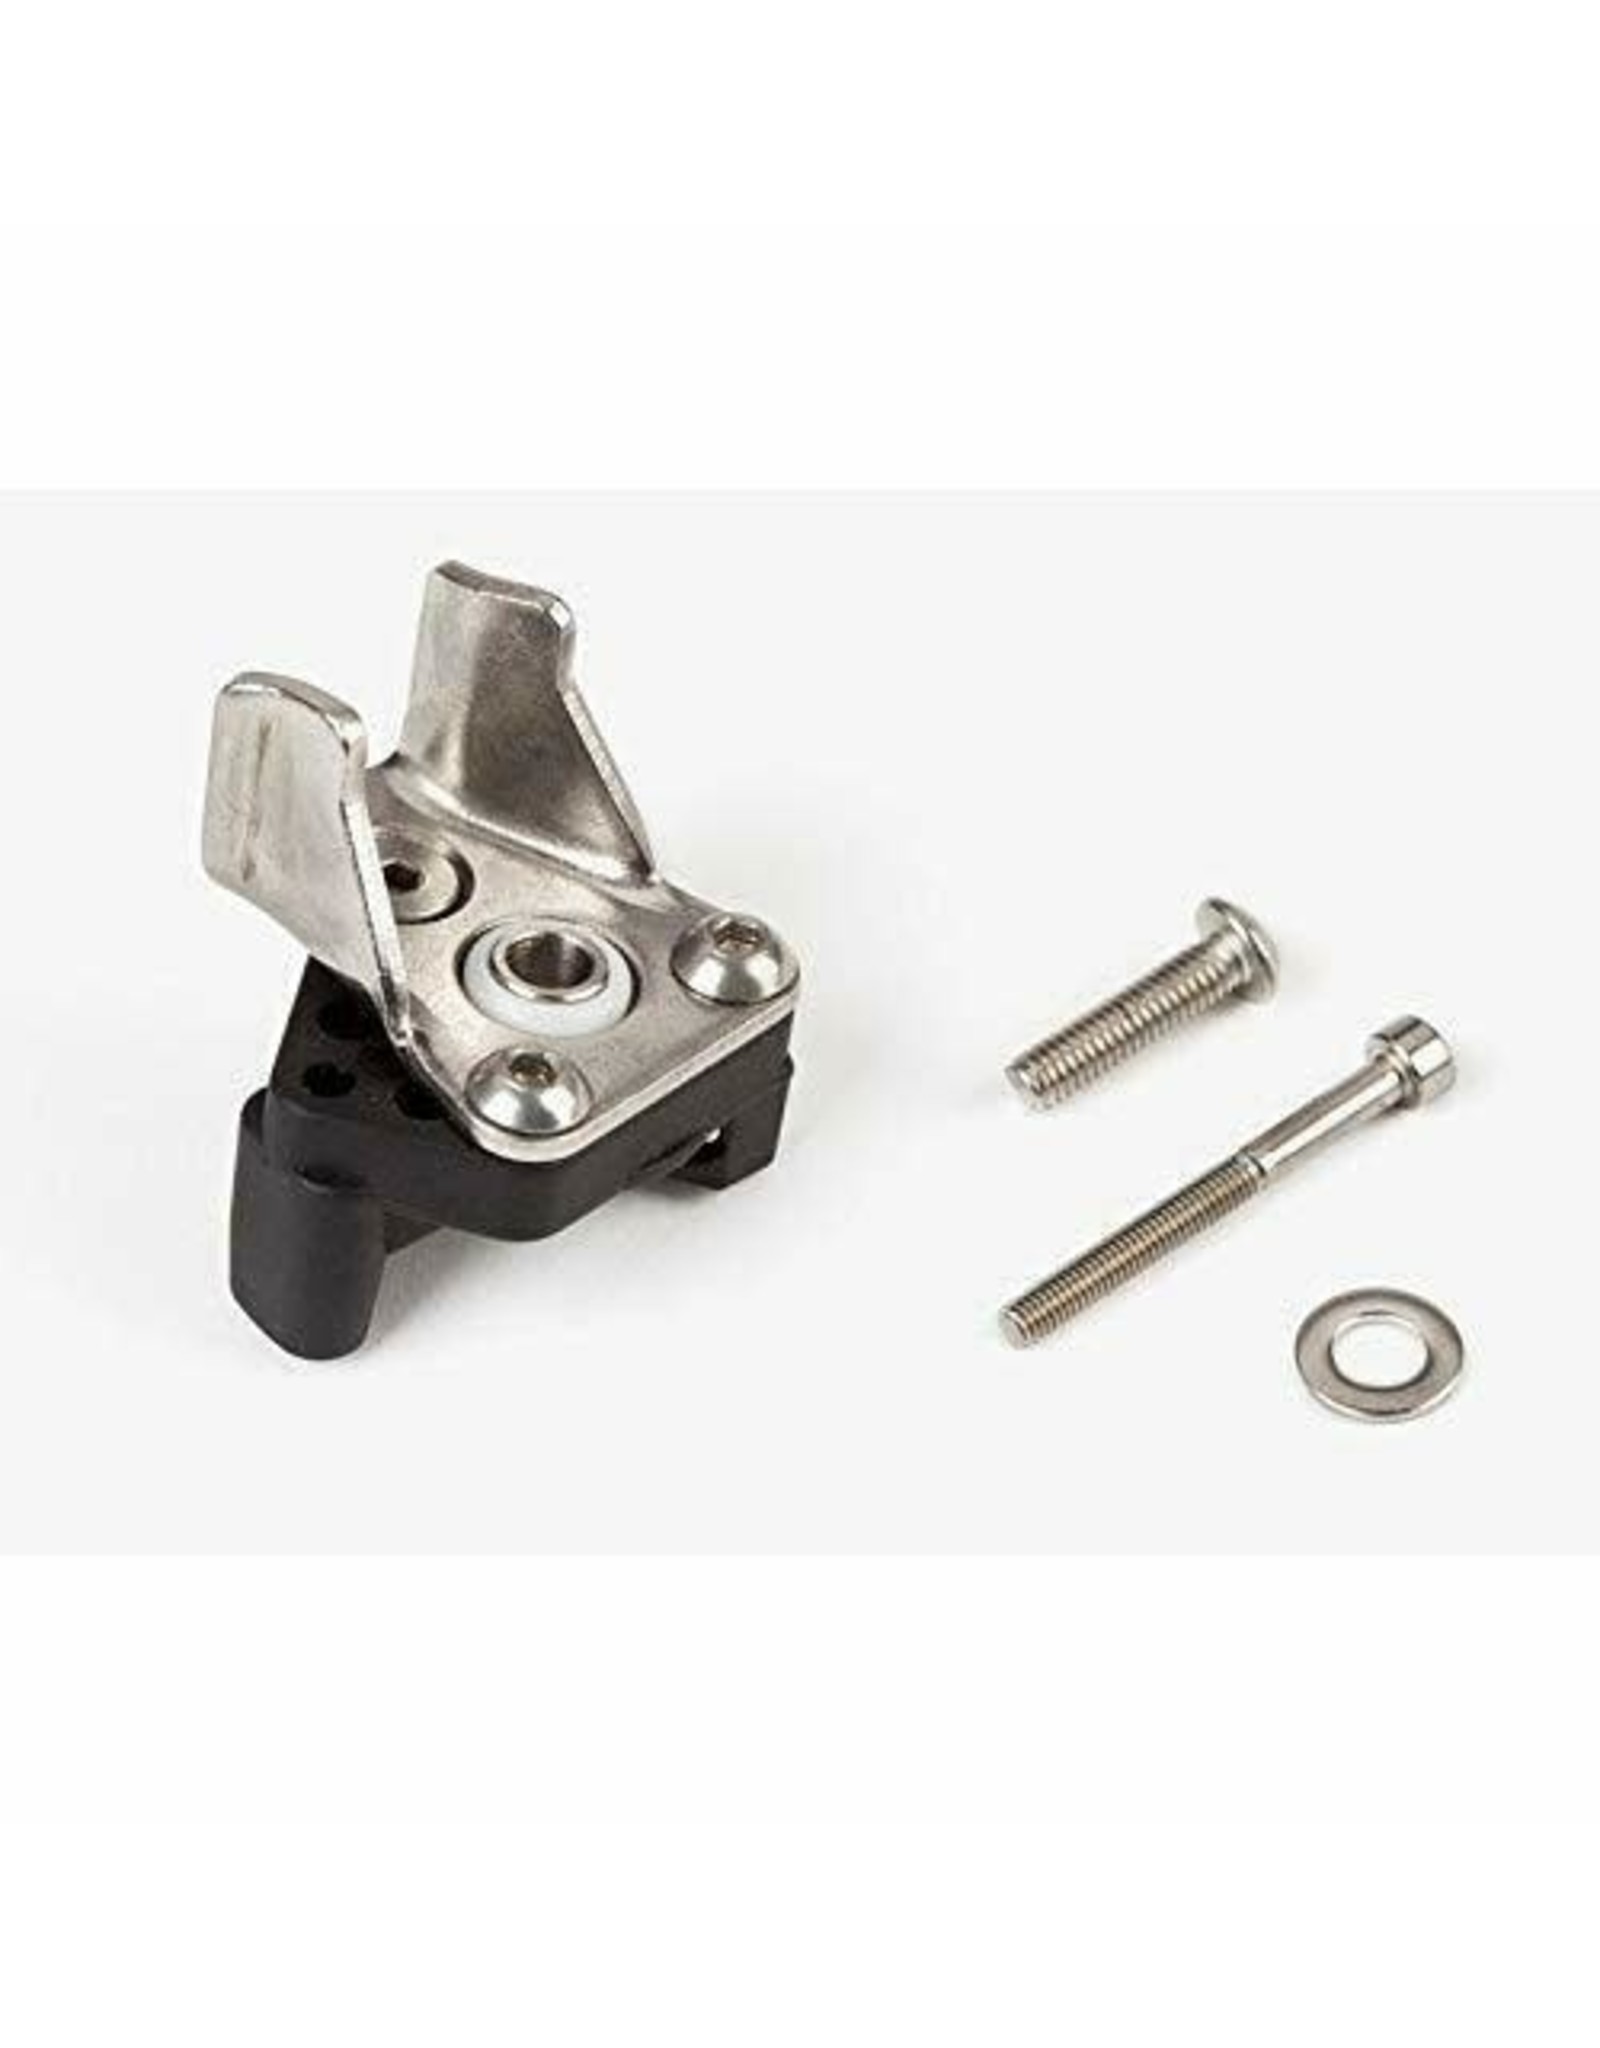 Brompton Brompton Derailleur Chain Pusher Assembly